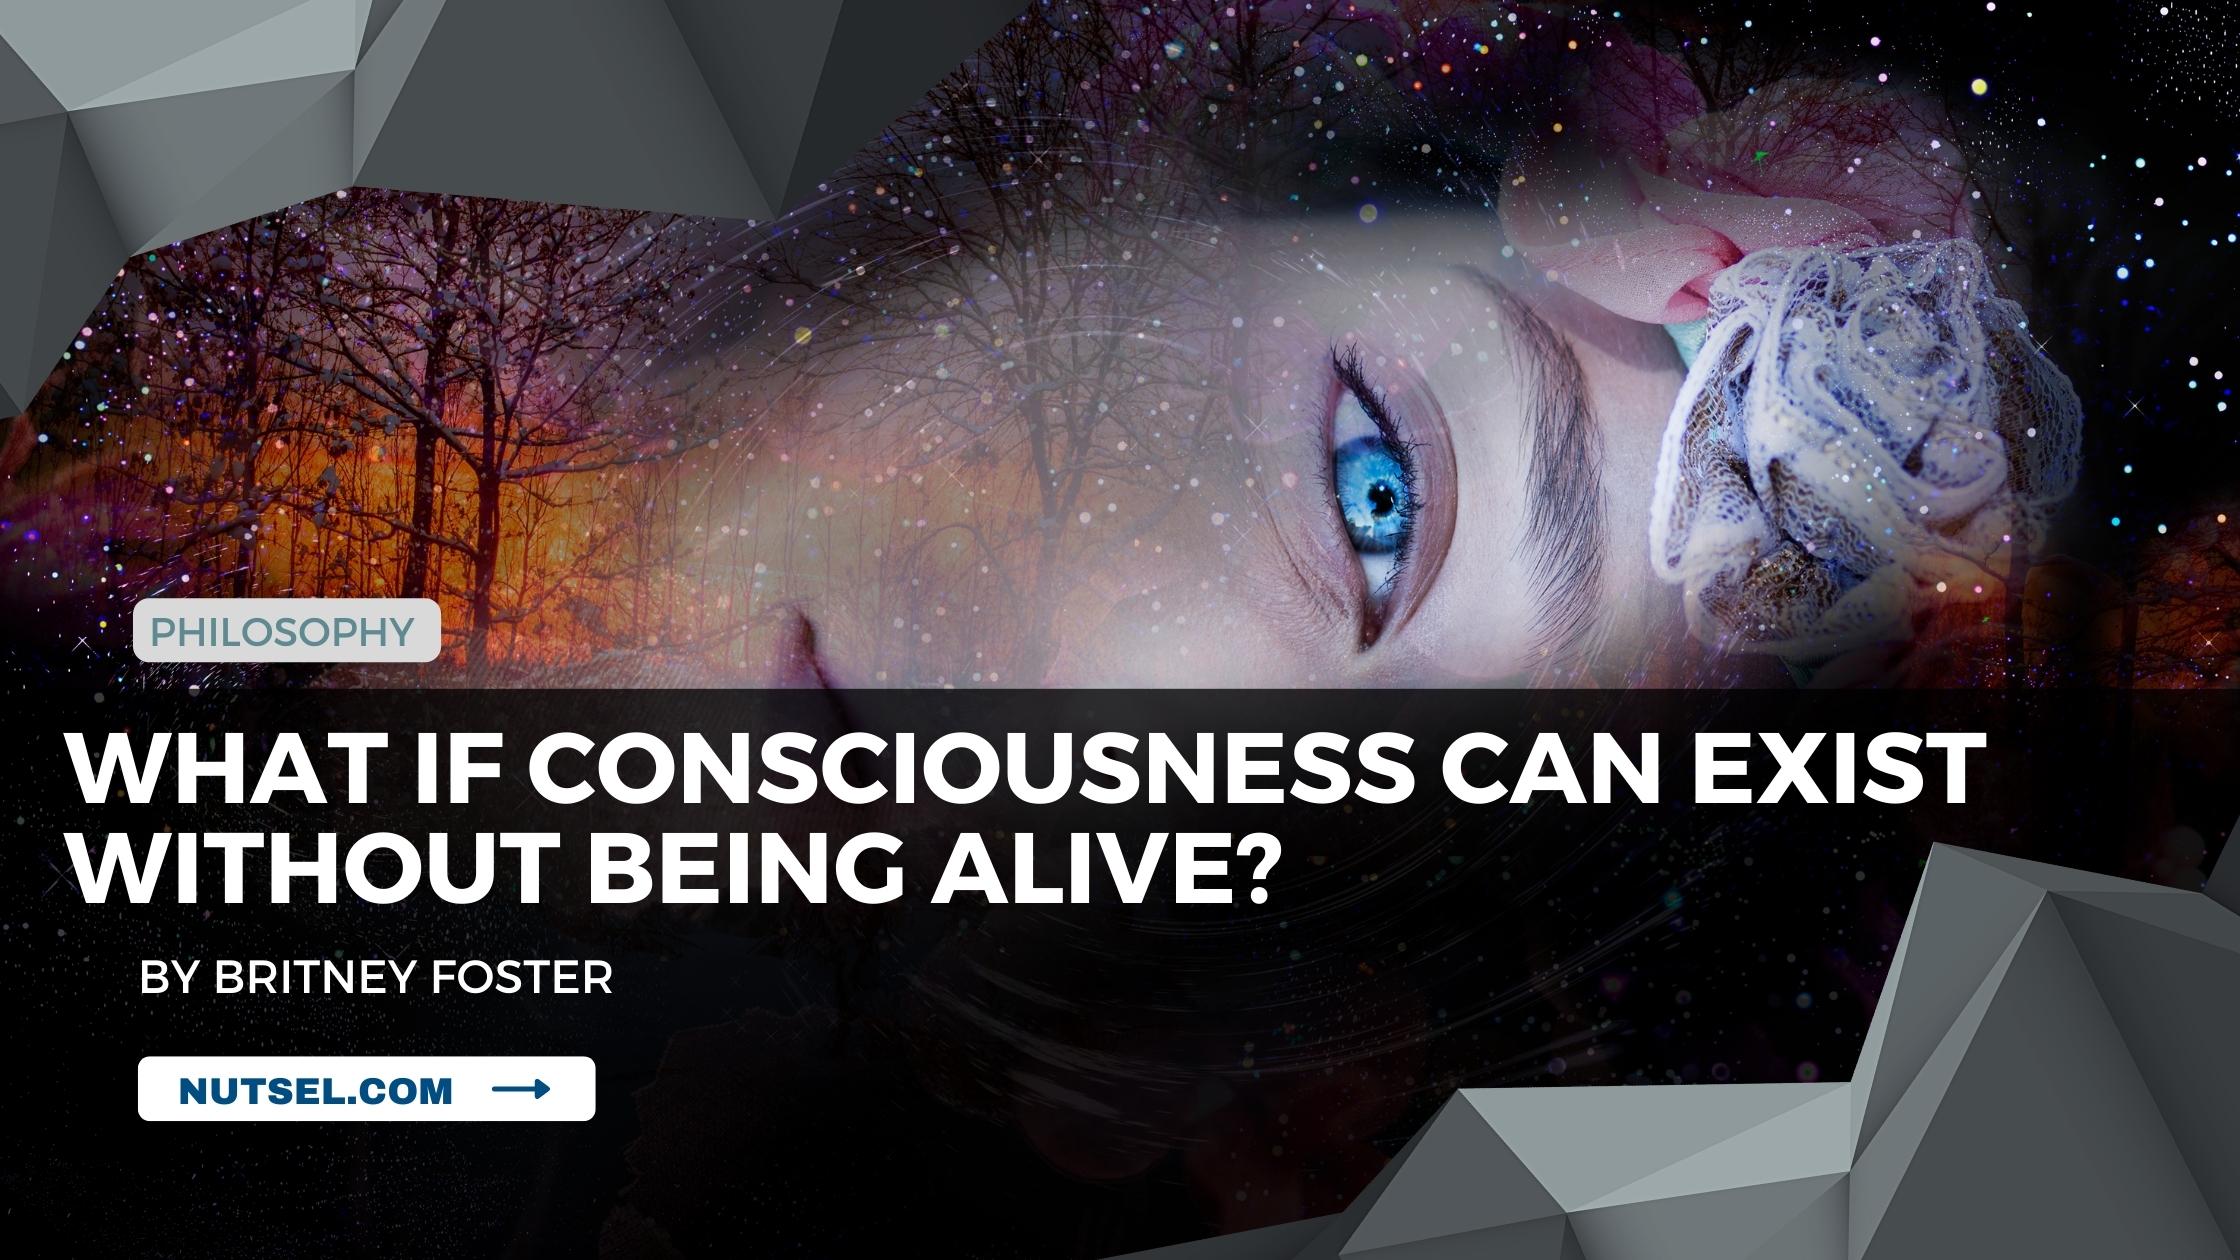 What if consciousness can exist without being alive?